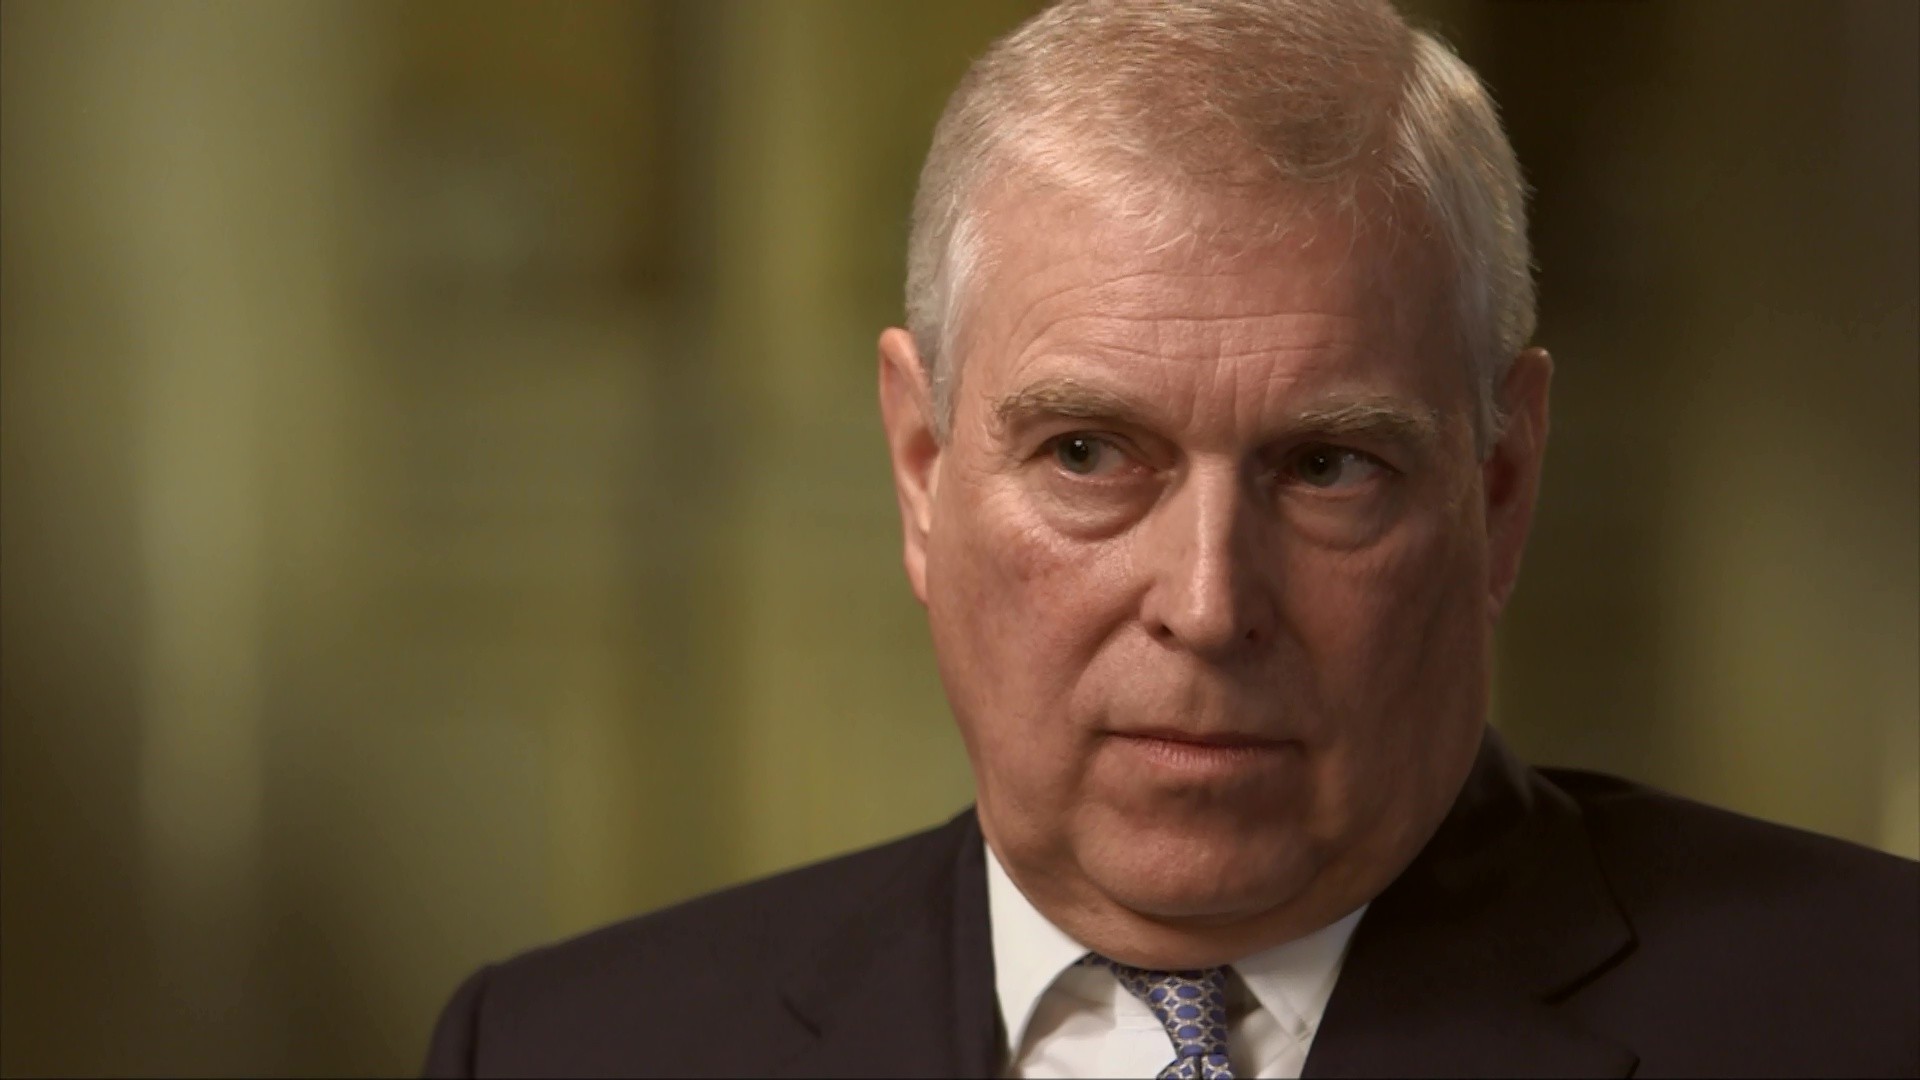 Prince Andrew says he has absolutely 